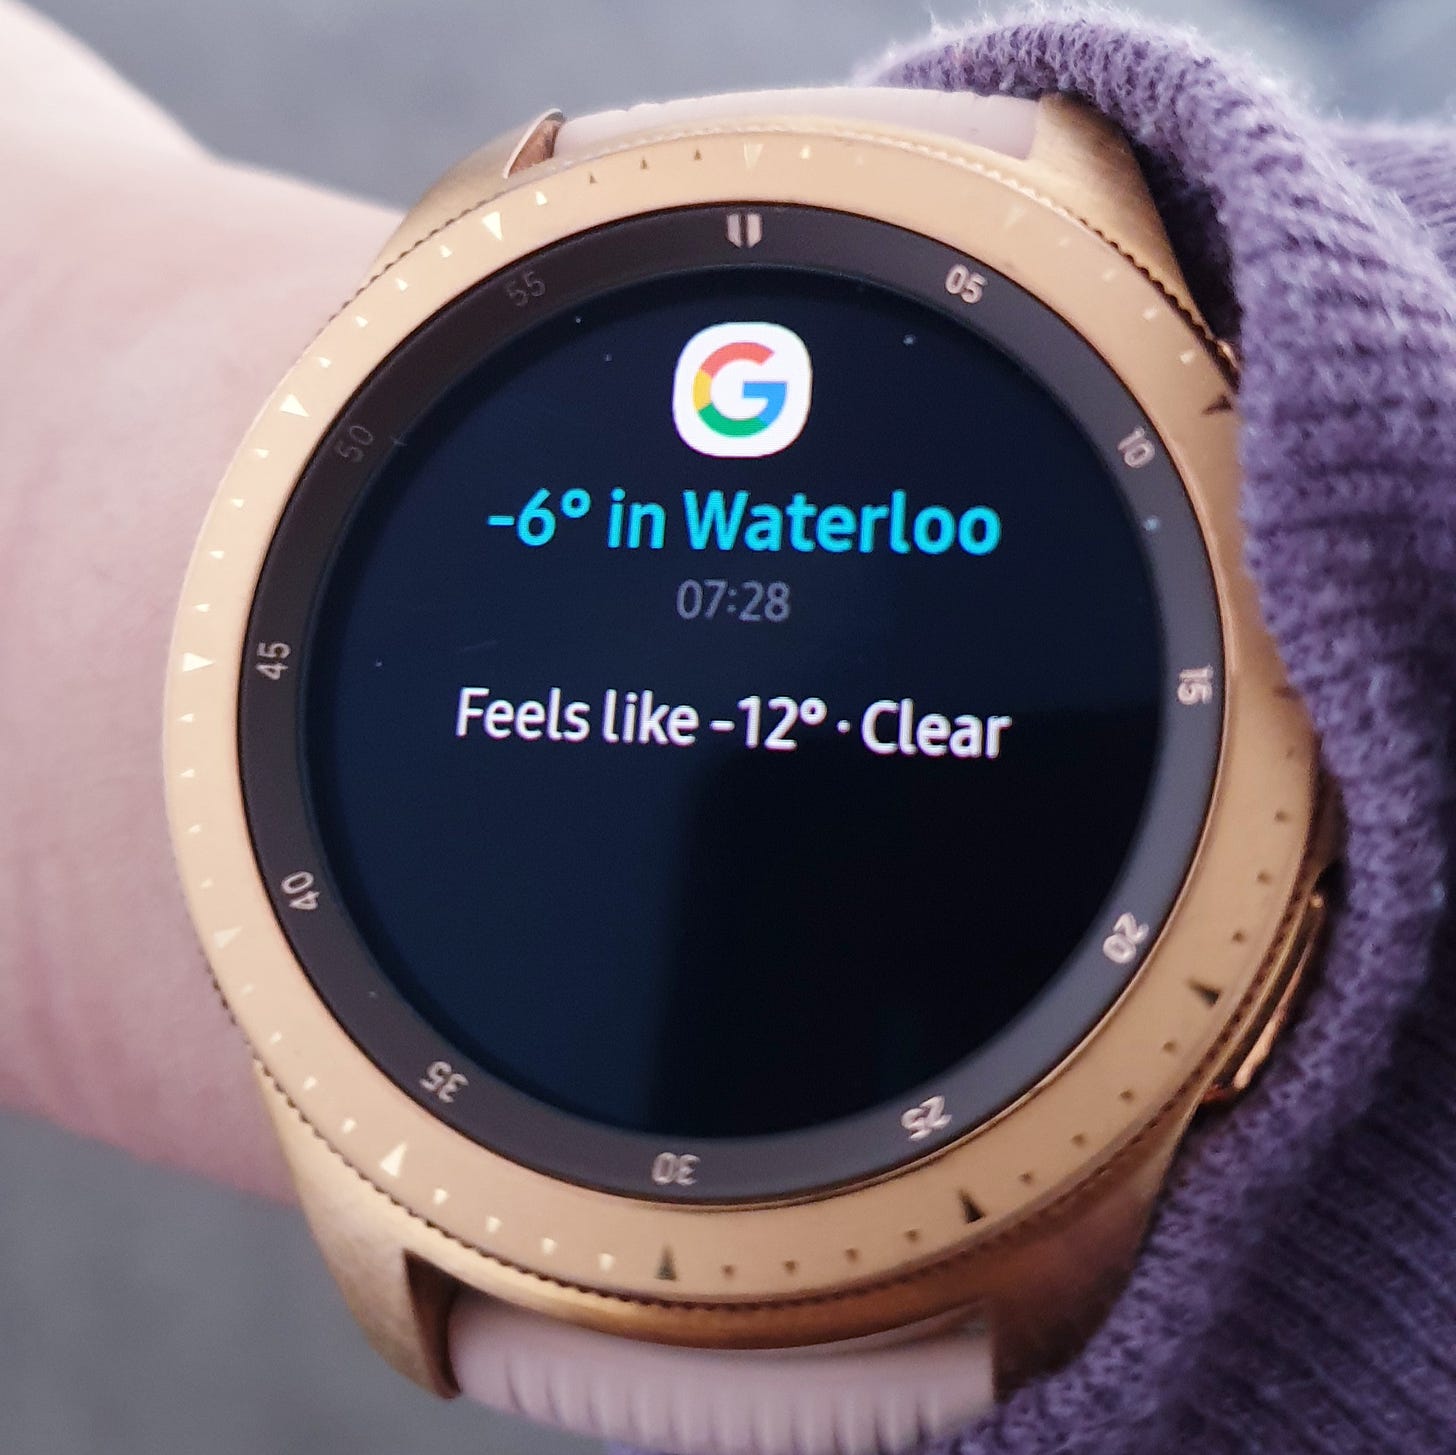 A smartwatch displays temperature in Waterloo at 07:28 to be -6 Celsius but feels like -12 degrees.